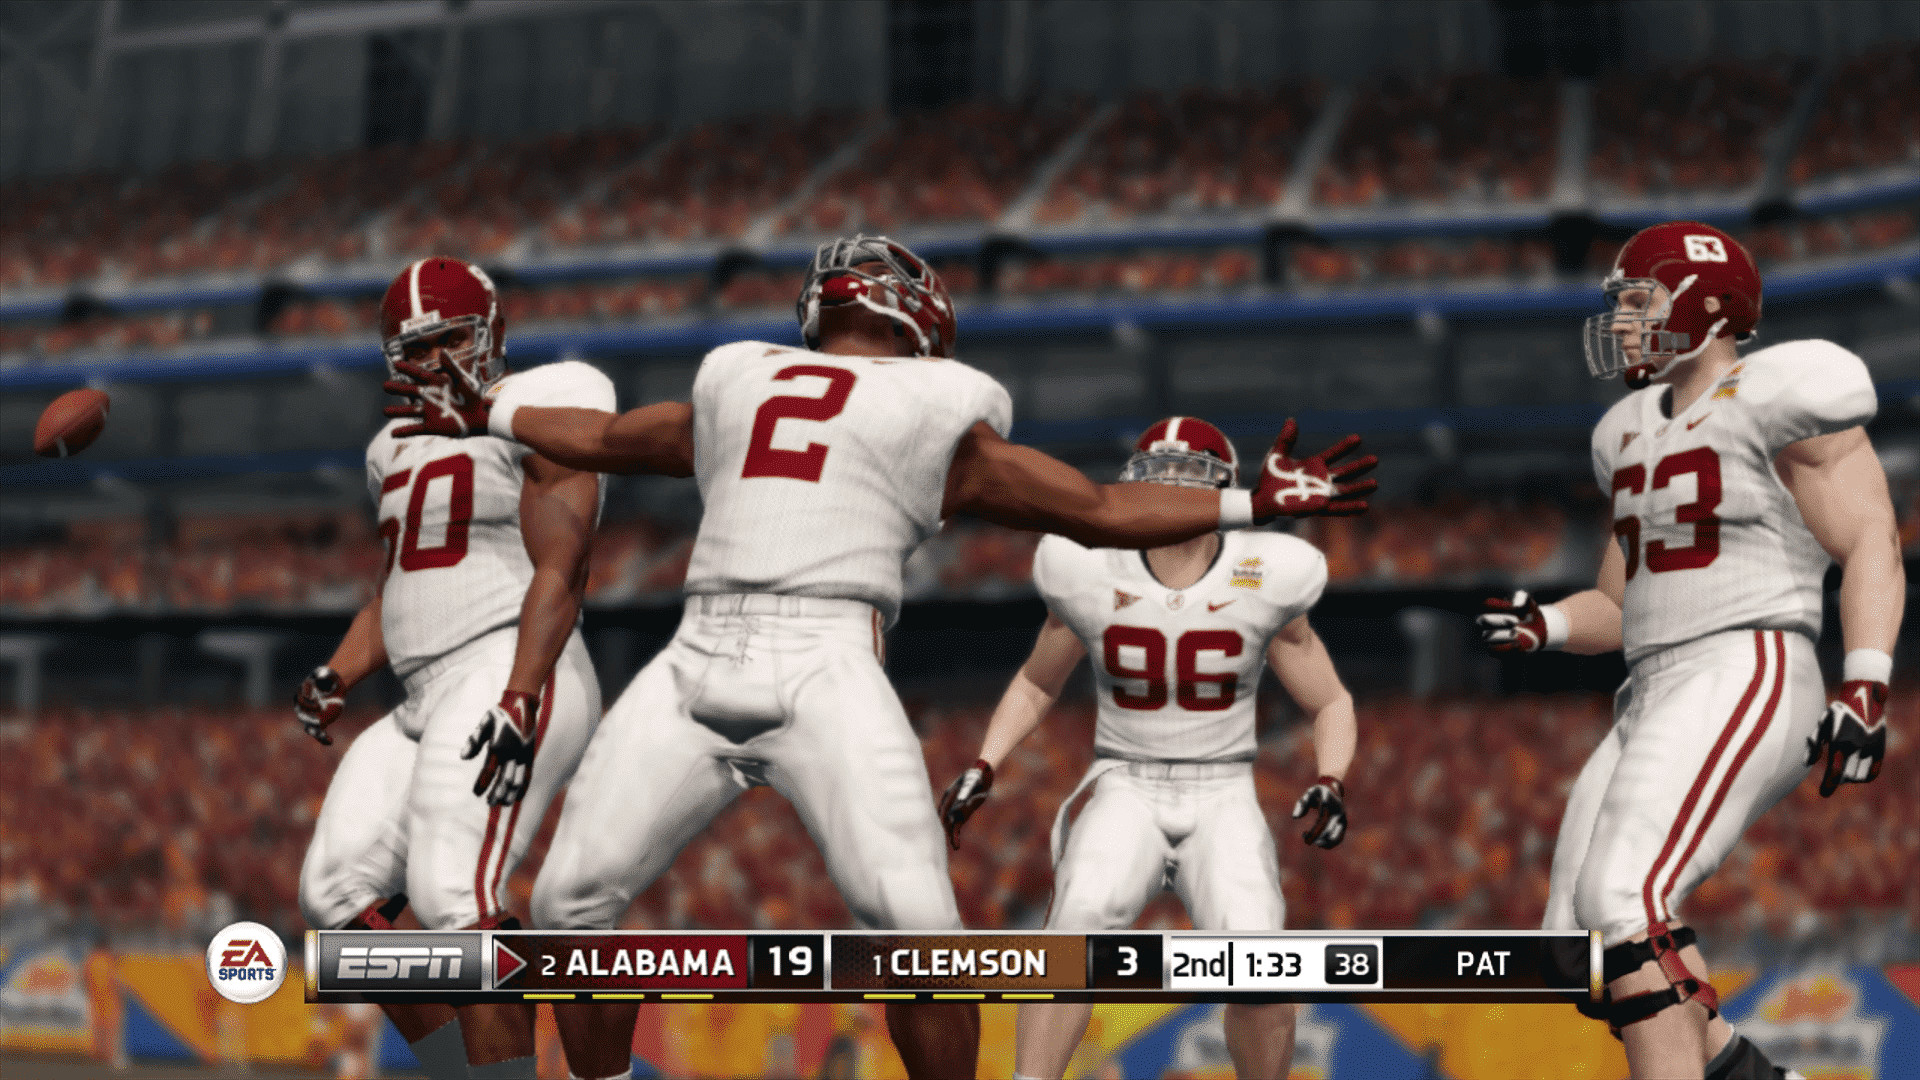 1920x1080 If Alabama gets up 19-3, this won't be a one score game.